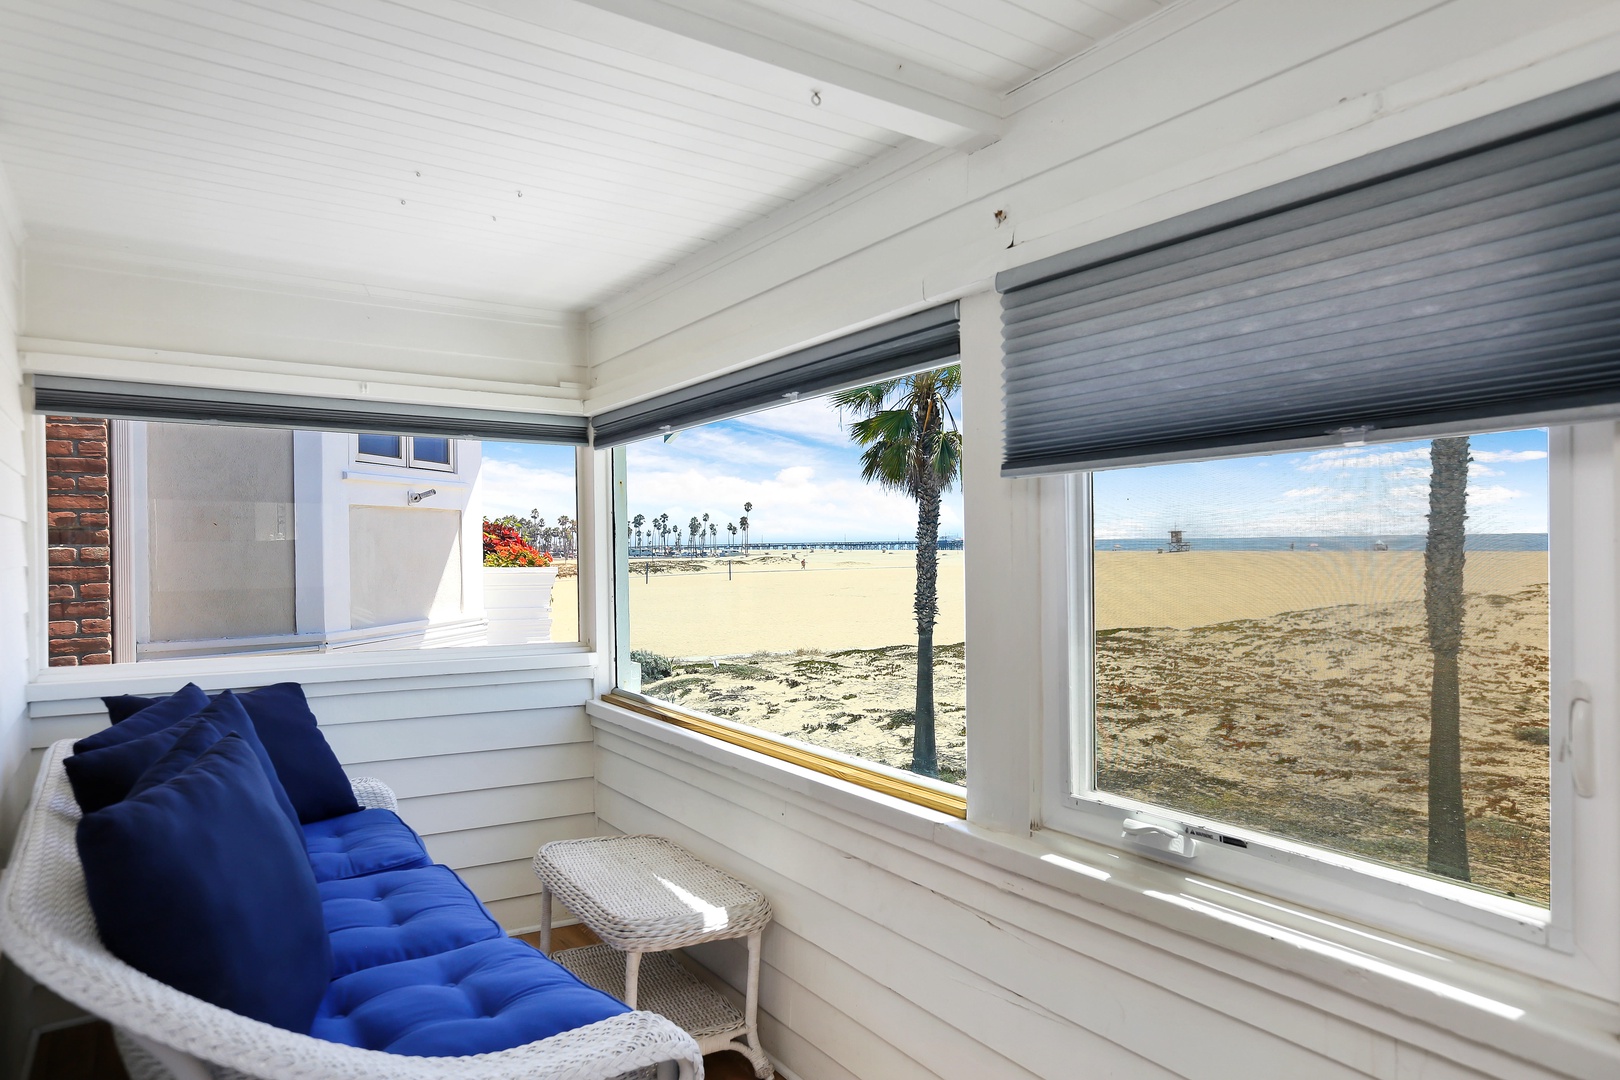 Small enclosed patio overlooking the beach attached to bedroom #1